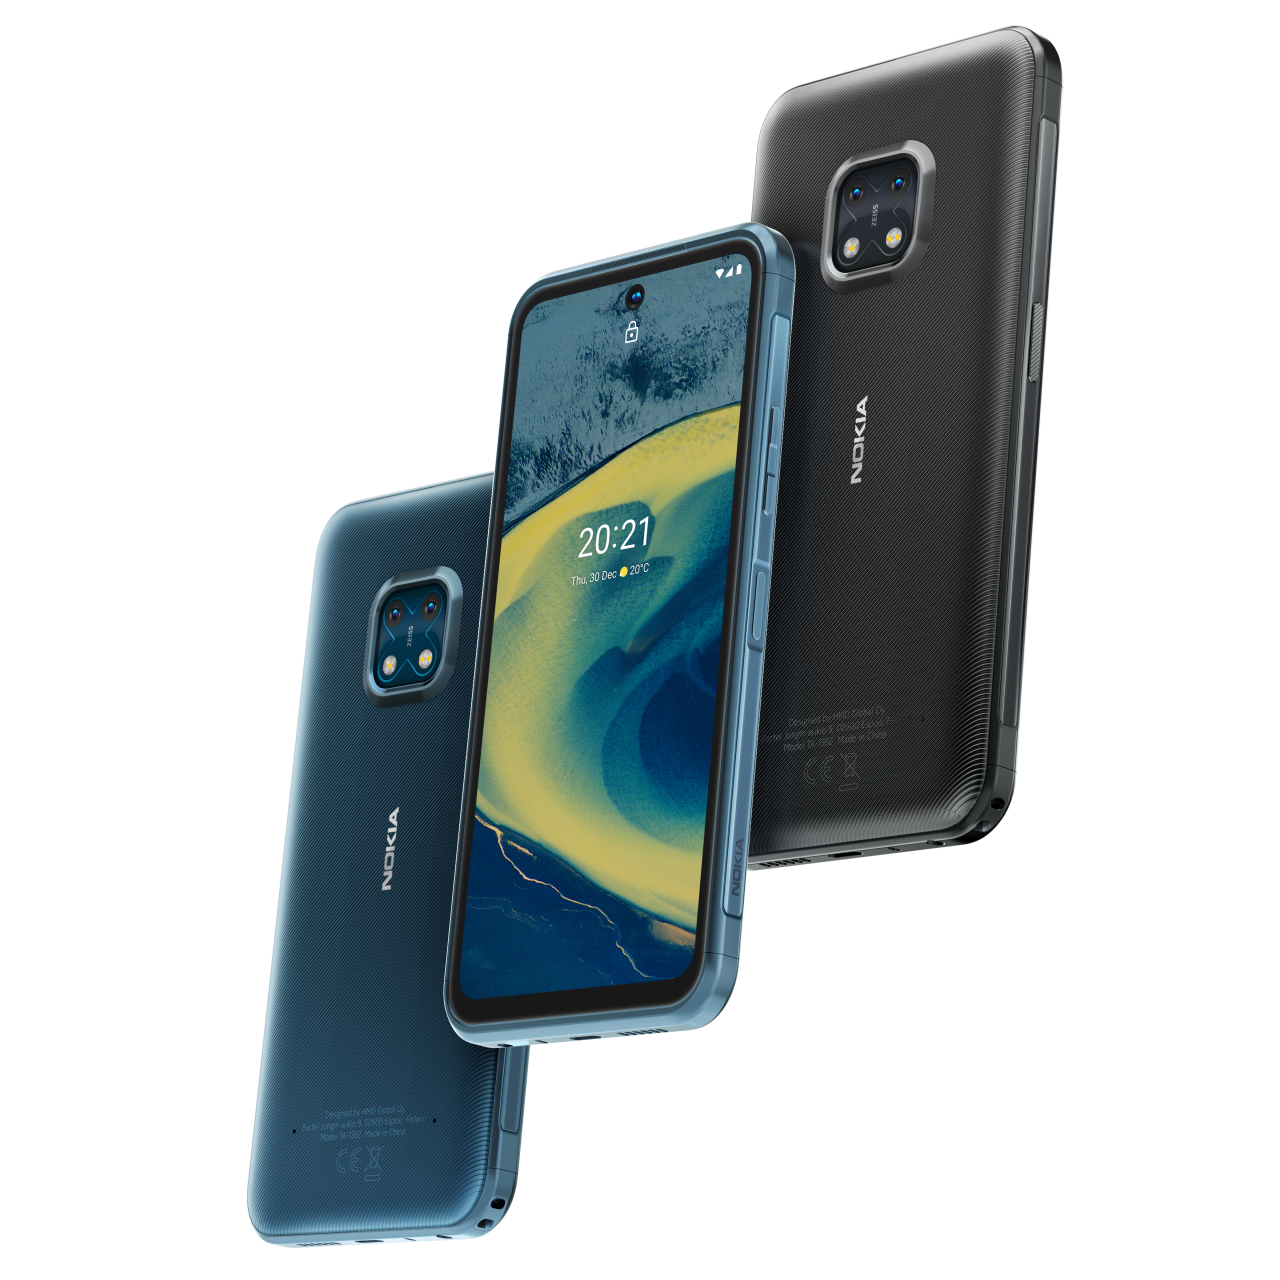 Nokia XR20 Emotional Pre Orders Open For New Rugged Nokia Smartphone